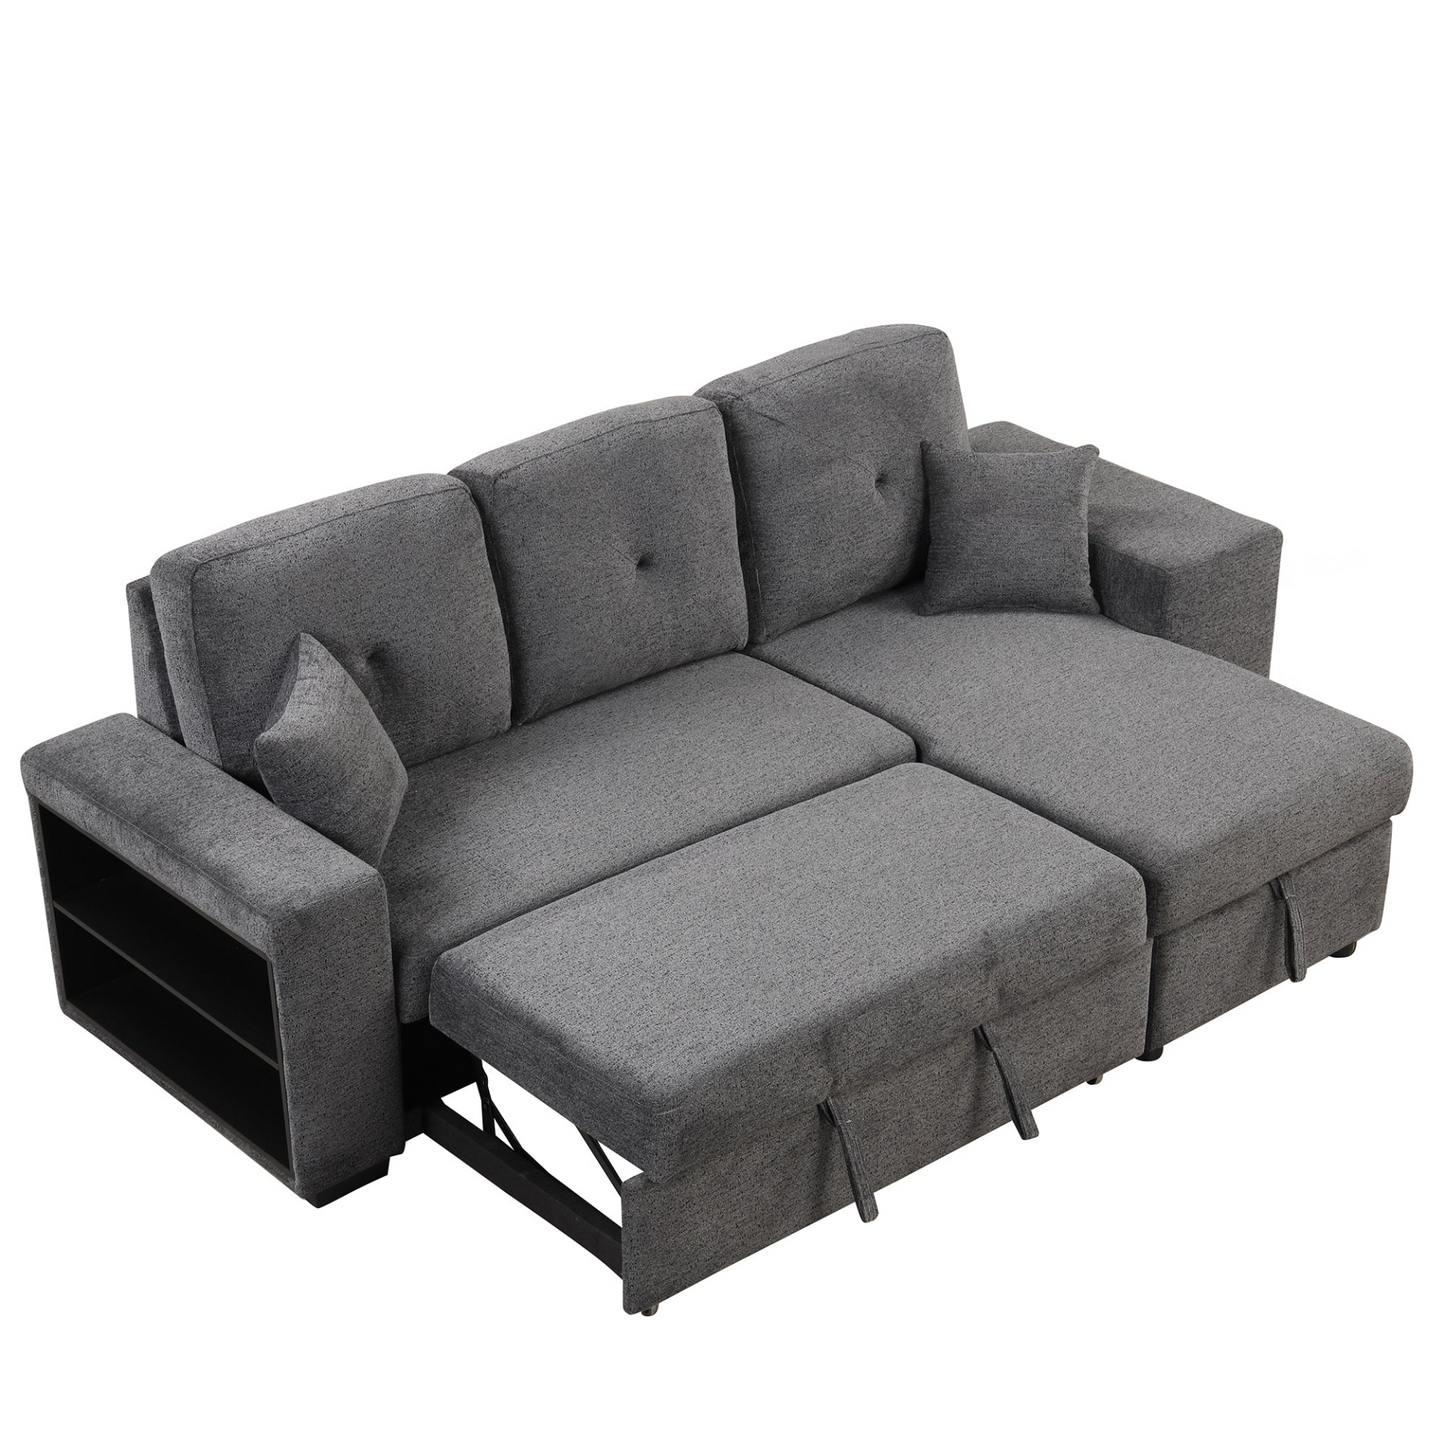 Reversible Sleeper Sectional Sofa Bed with Side Shelf and 2 Stools,Pull-Out L-Shaped Sofa Bed,Corner Sofa-Bed with Storage Chaise Left/Right Hande for Living Room,Blue Black